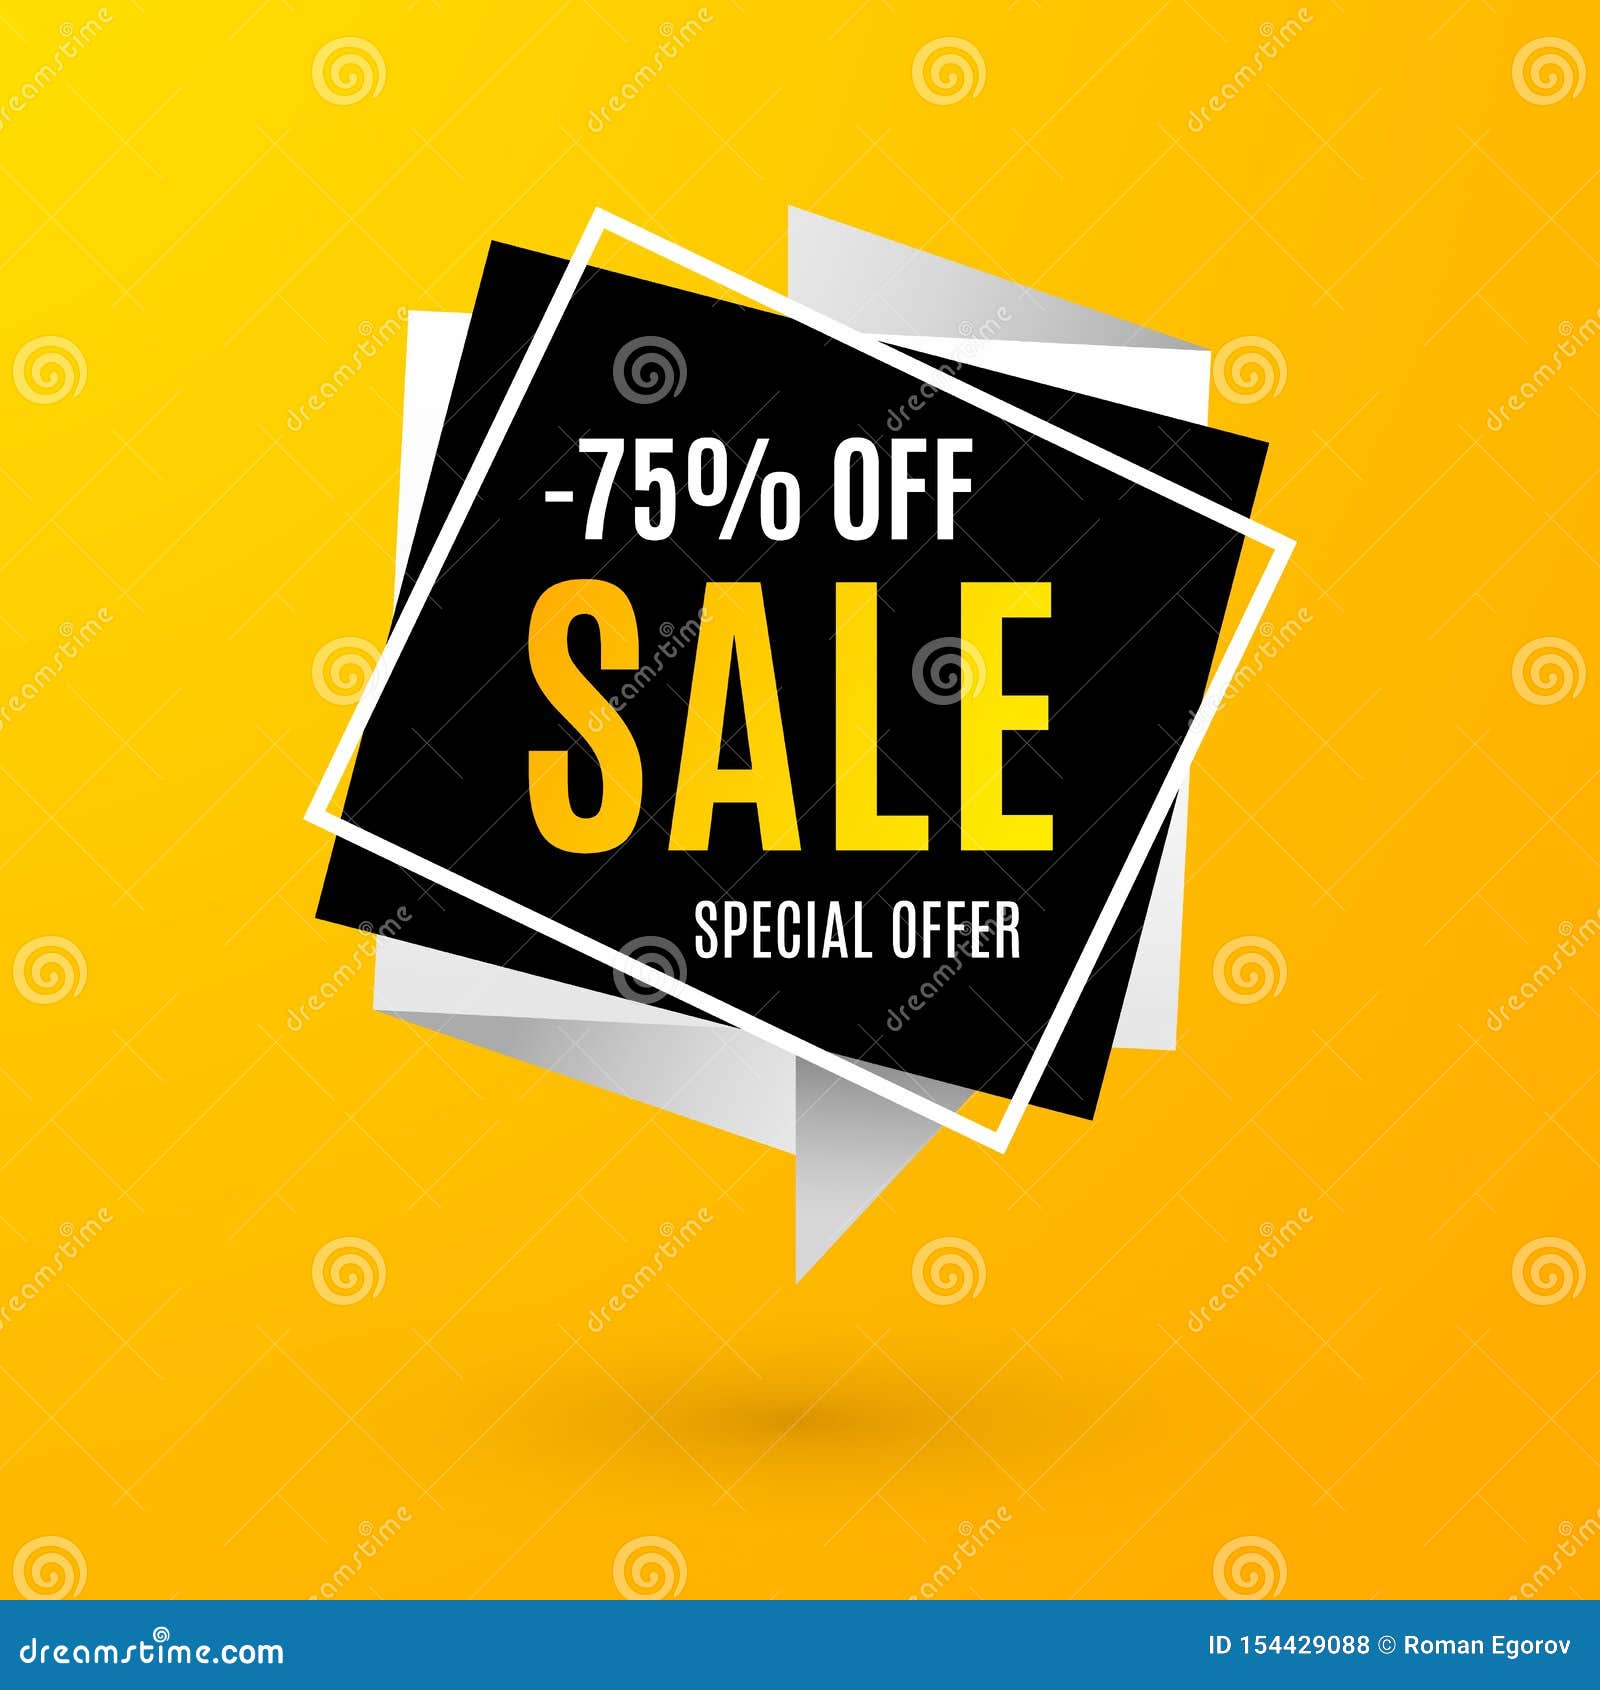 super sale layout. best price  badge, discount season special offer.   promote promotion big